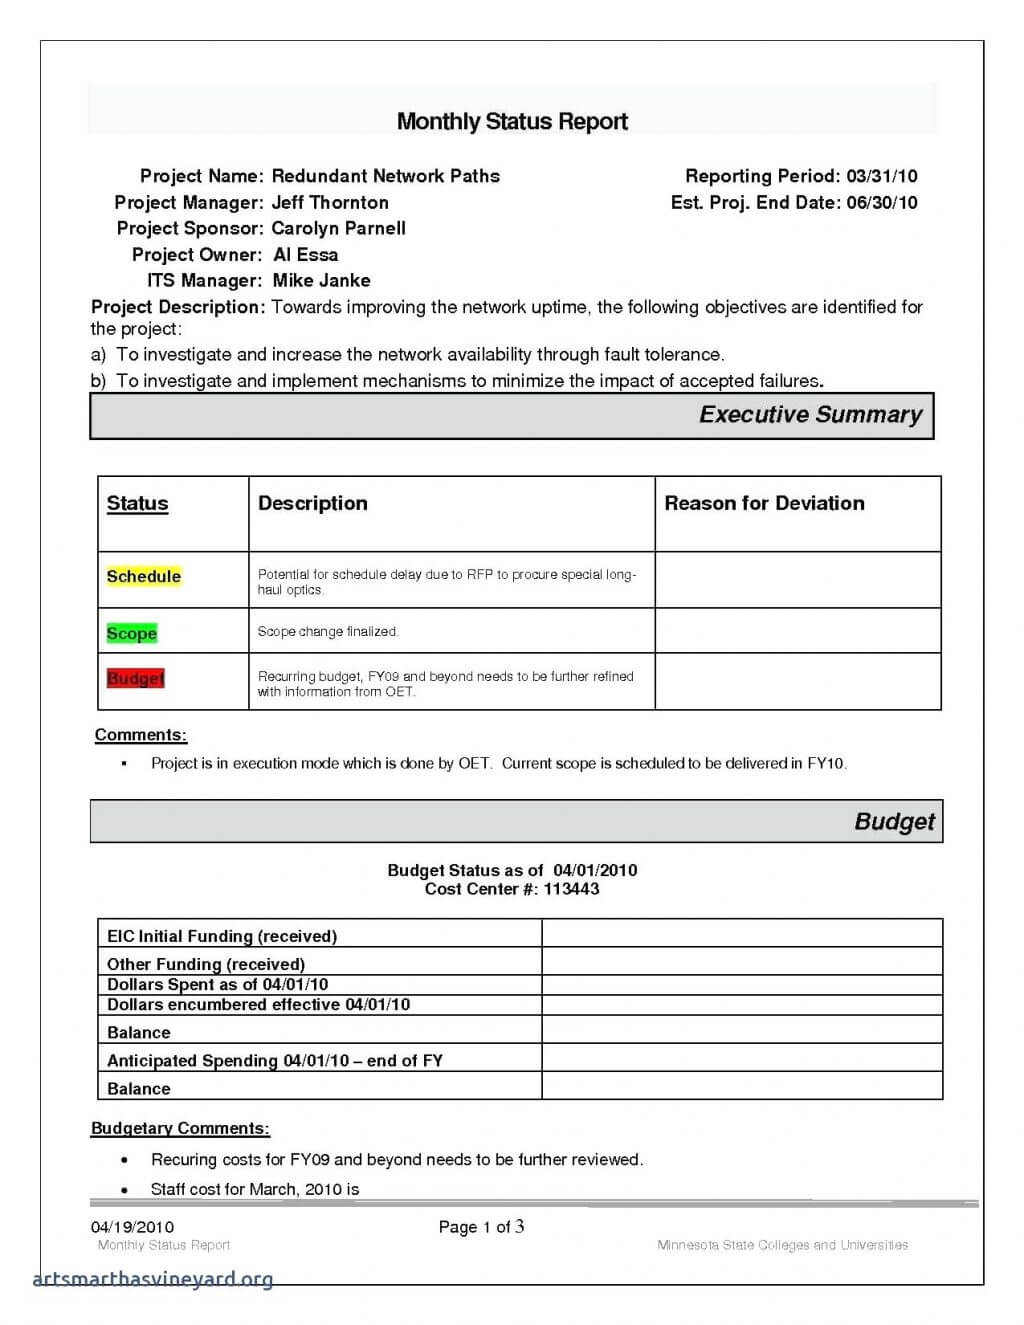 Weekly Report Template Examples Student Progress Pdf Format In Project Status Report Template Word 2010